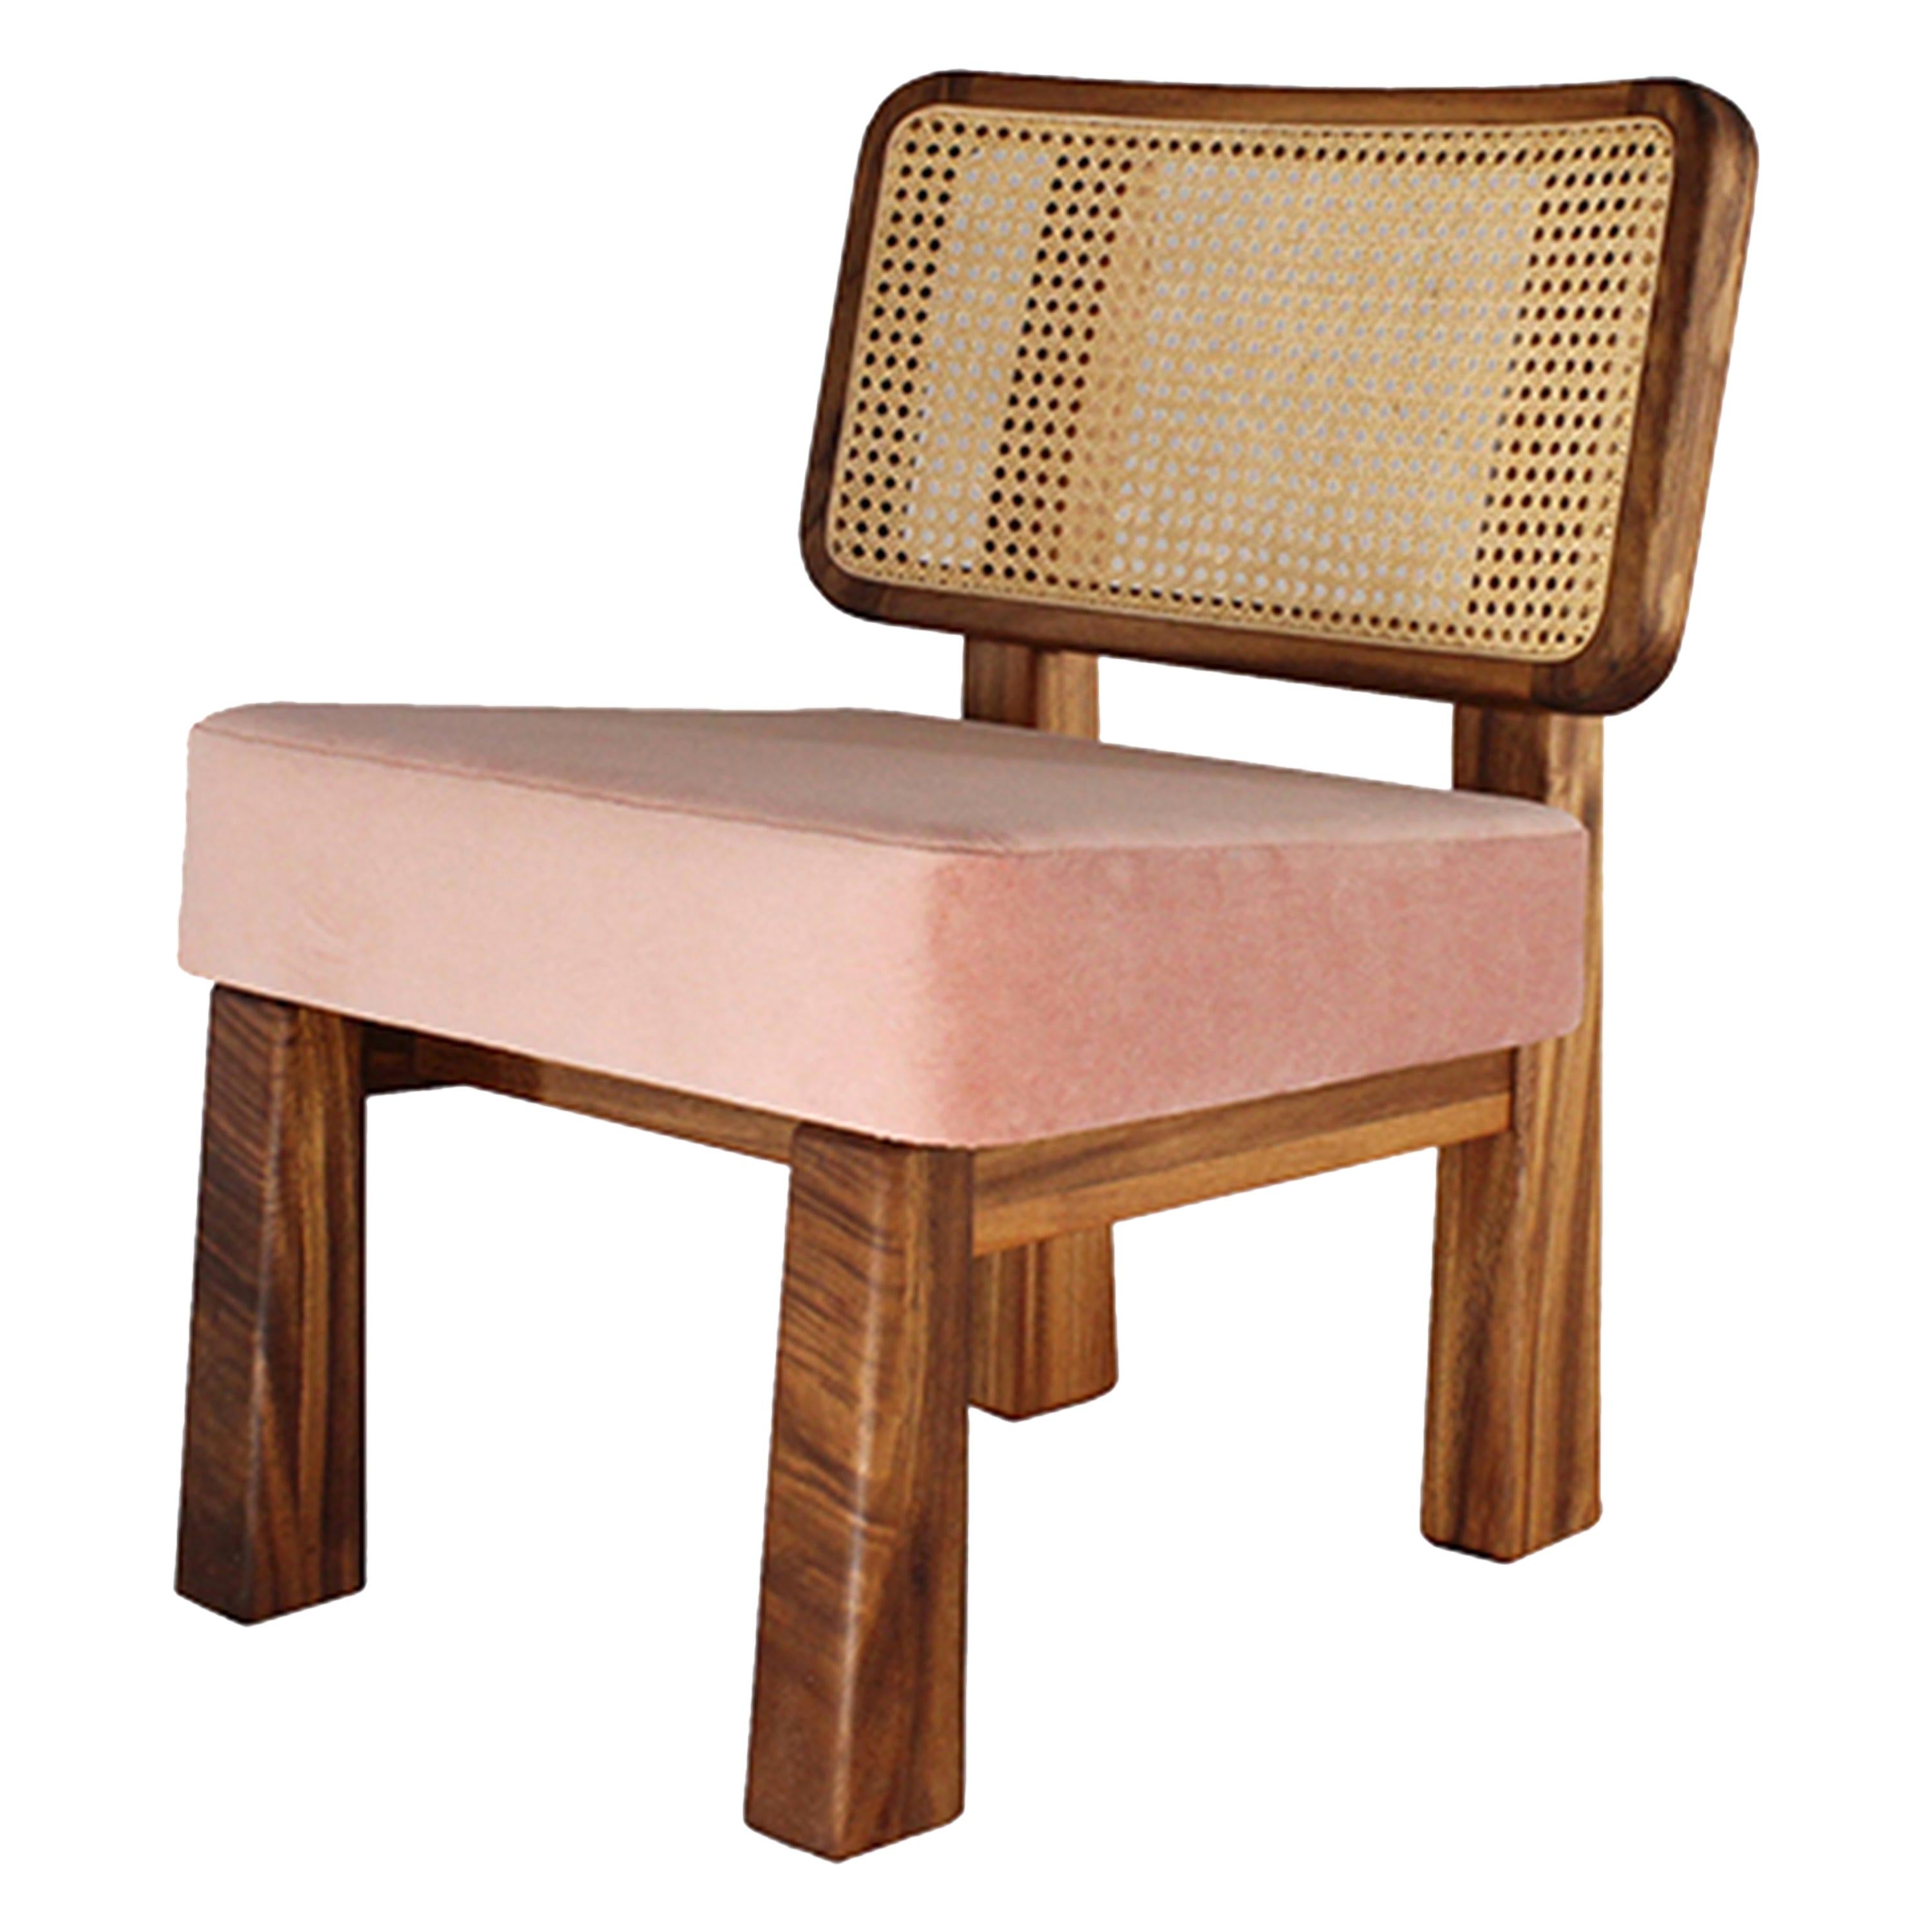 Colima Low Chair Solid Wood and Wicker Back, Contemporary Mexican Design For Sale